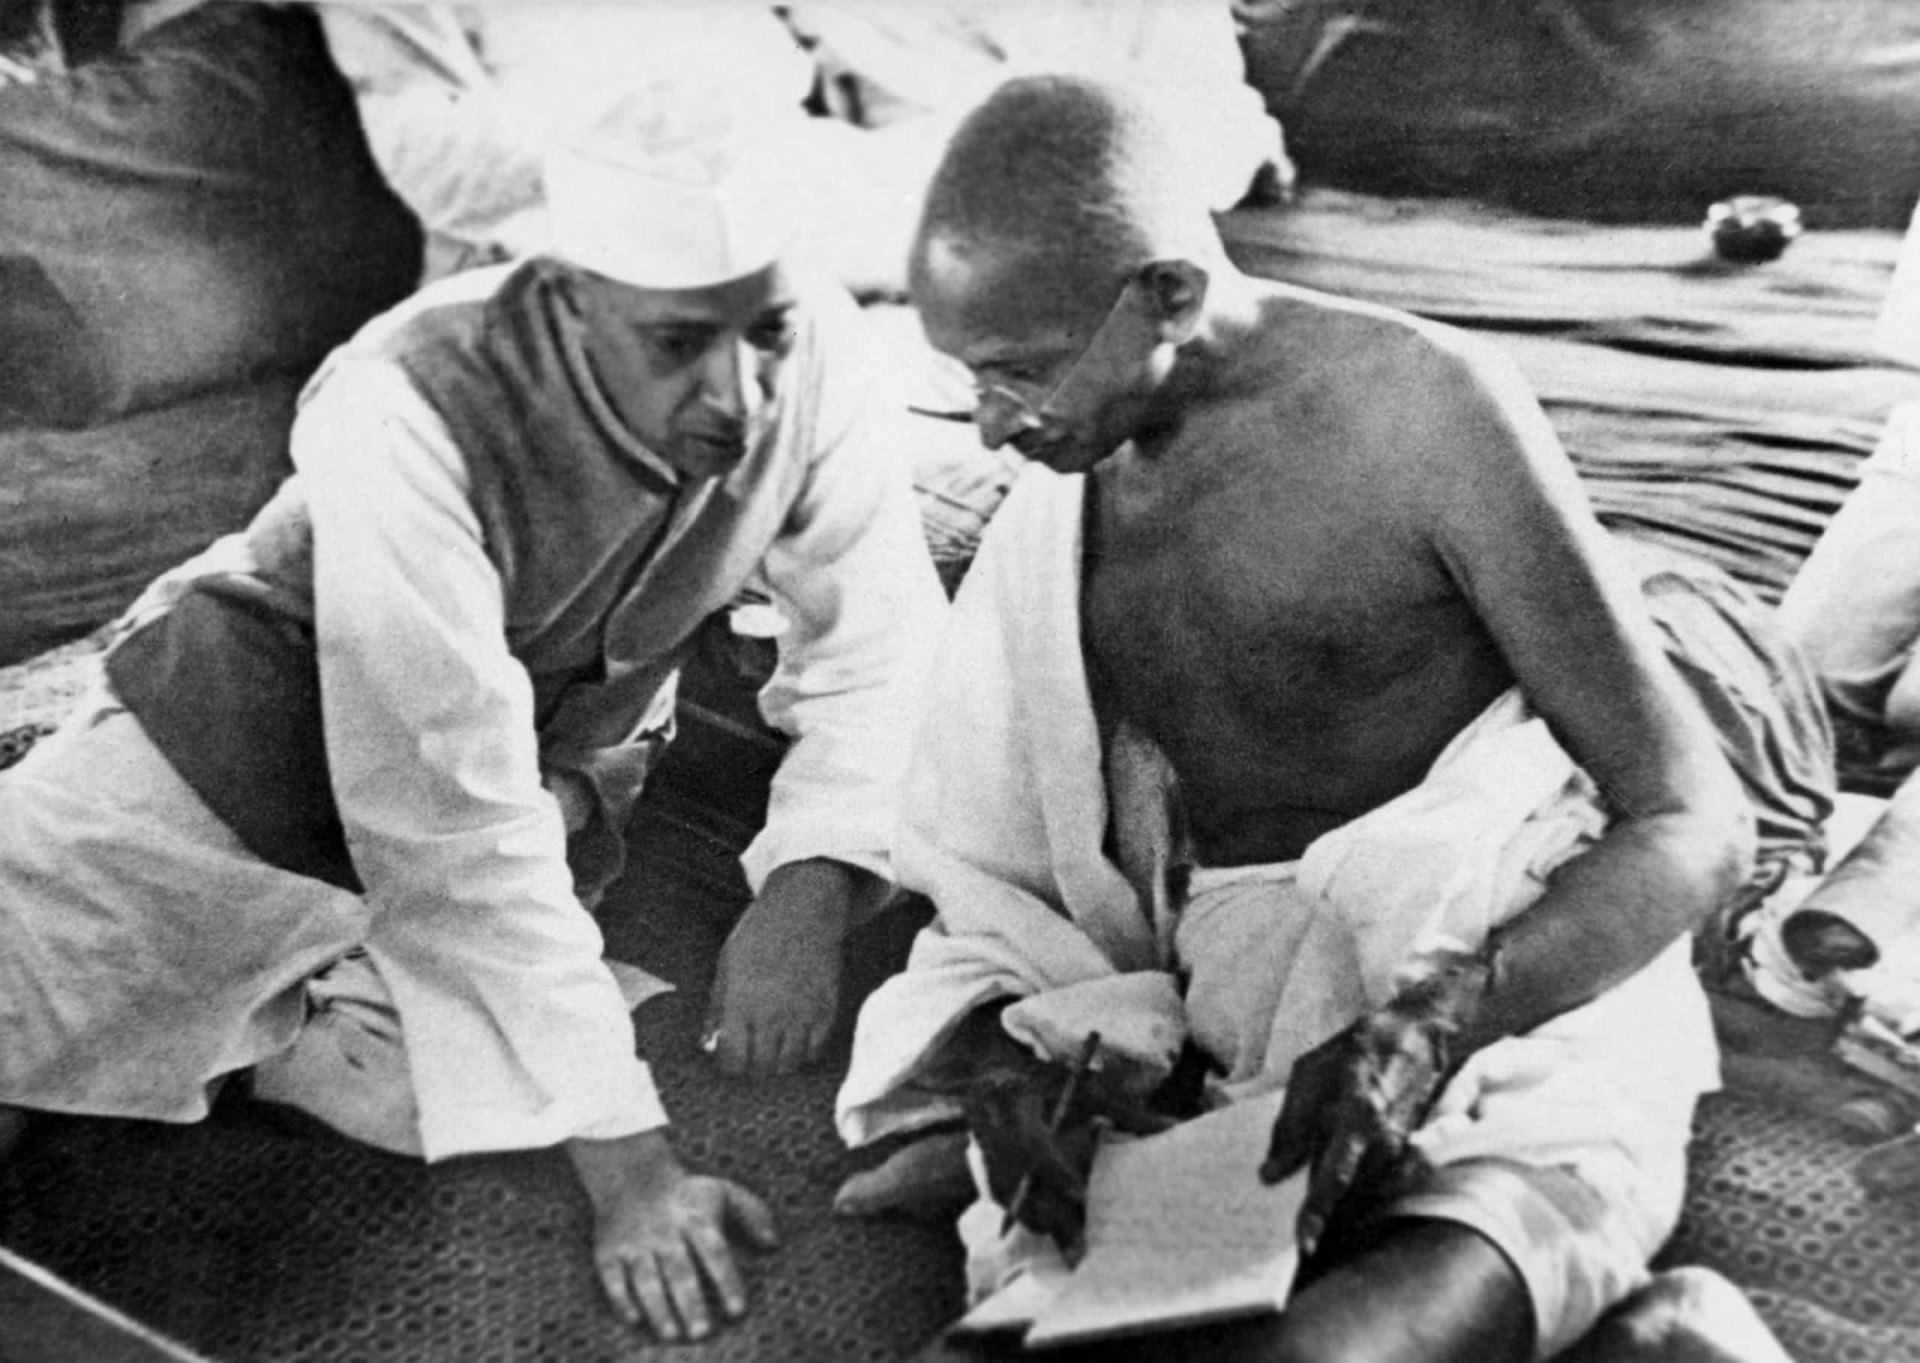 <p>Launched at the Bombay session of the All-India Congress Committee by Gandhi in August 1942, the Quit India Movement demanded an end to British rule in India. After Gandhi's speech calling for an "orderly British withdrawal," almost the entire Congress leadership were imprisoned, and remained behind bars for the duration of the Second World War. Gandhi is pictured with Jawaharlal Nehru (1889–1964). </p><p><a href="https://www.msn.com/en-us/community/channel/vid-7xx8mnucu55yw63we9va2gwr7uihbxwc68fxqp25x6tg4ftibpra?cvid=94631541bc0f4f89bfd59158d696ad7e">Follow us and access great exclusive content every day</a></p>